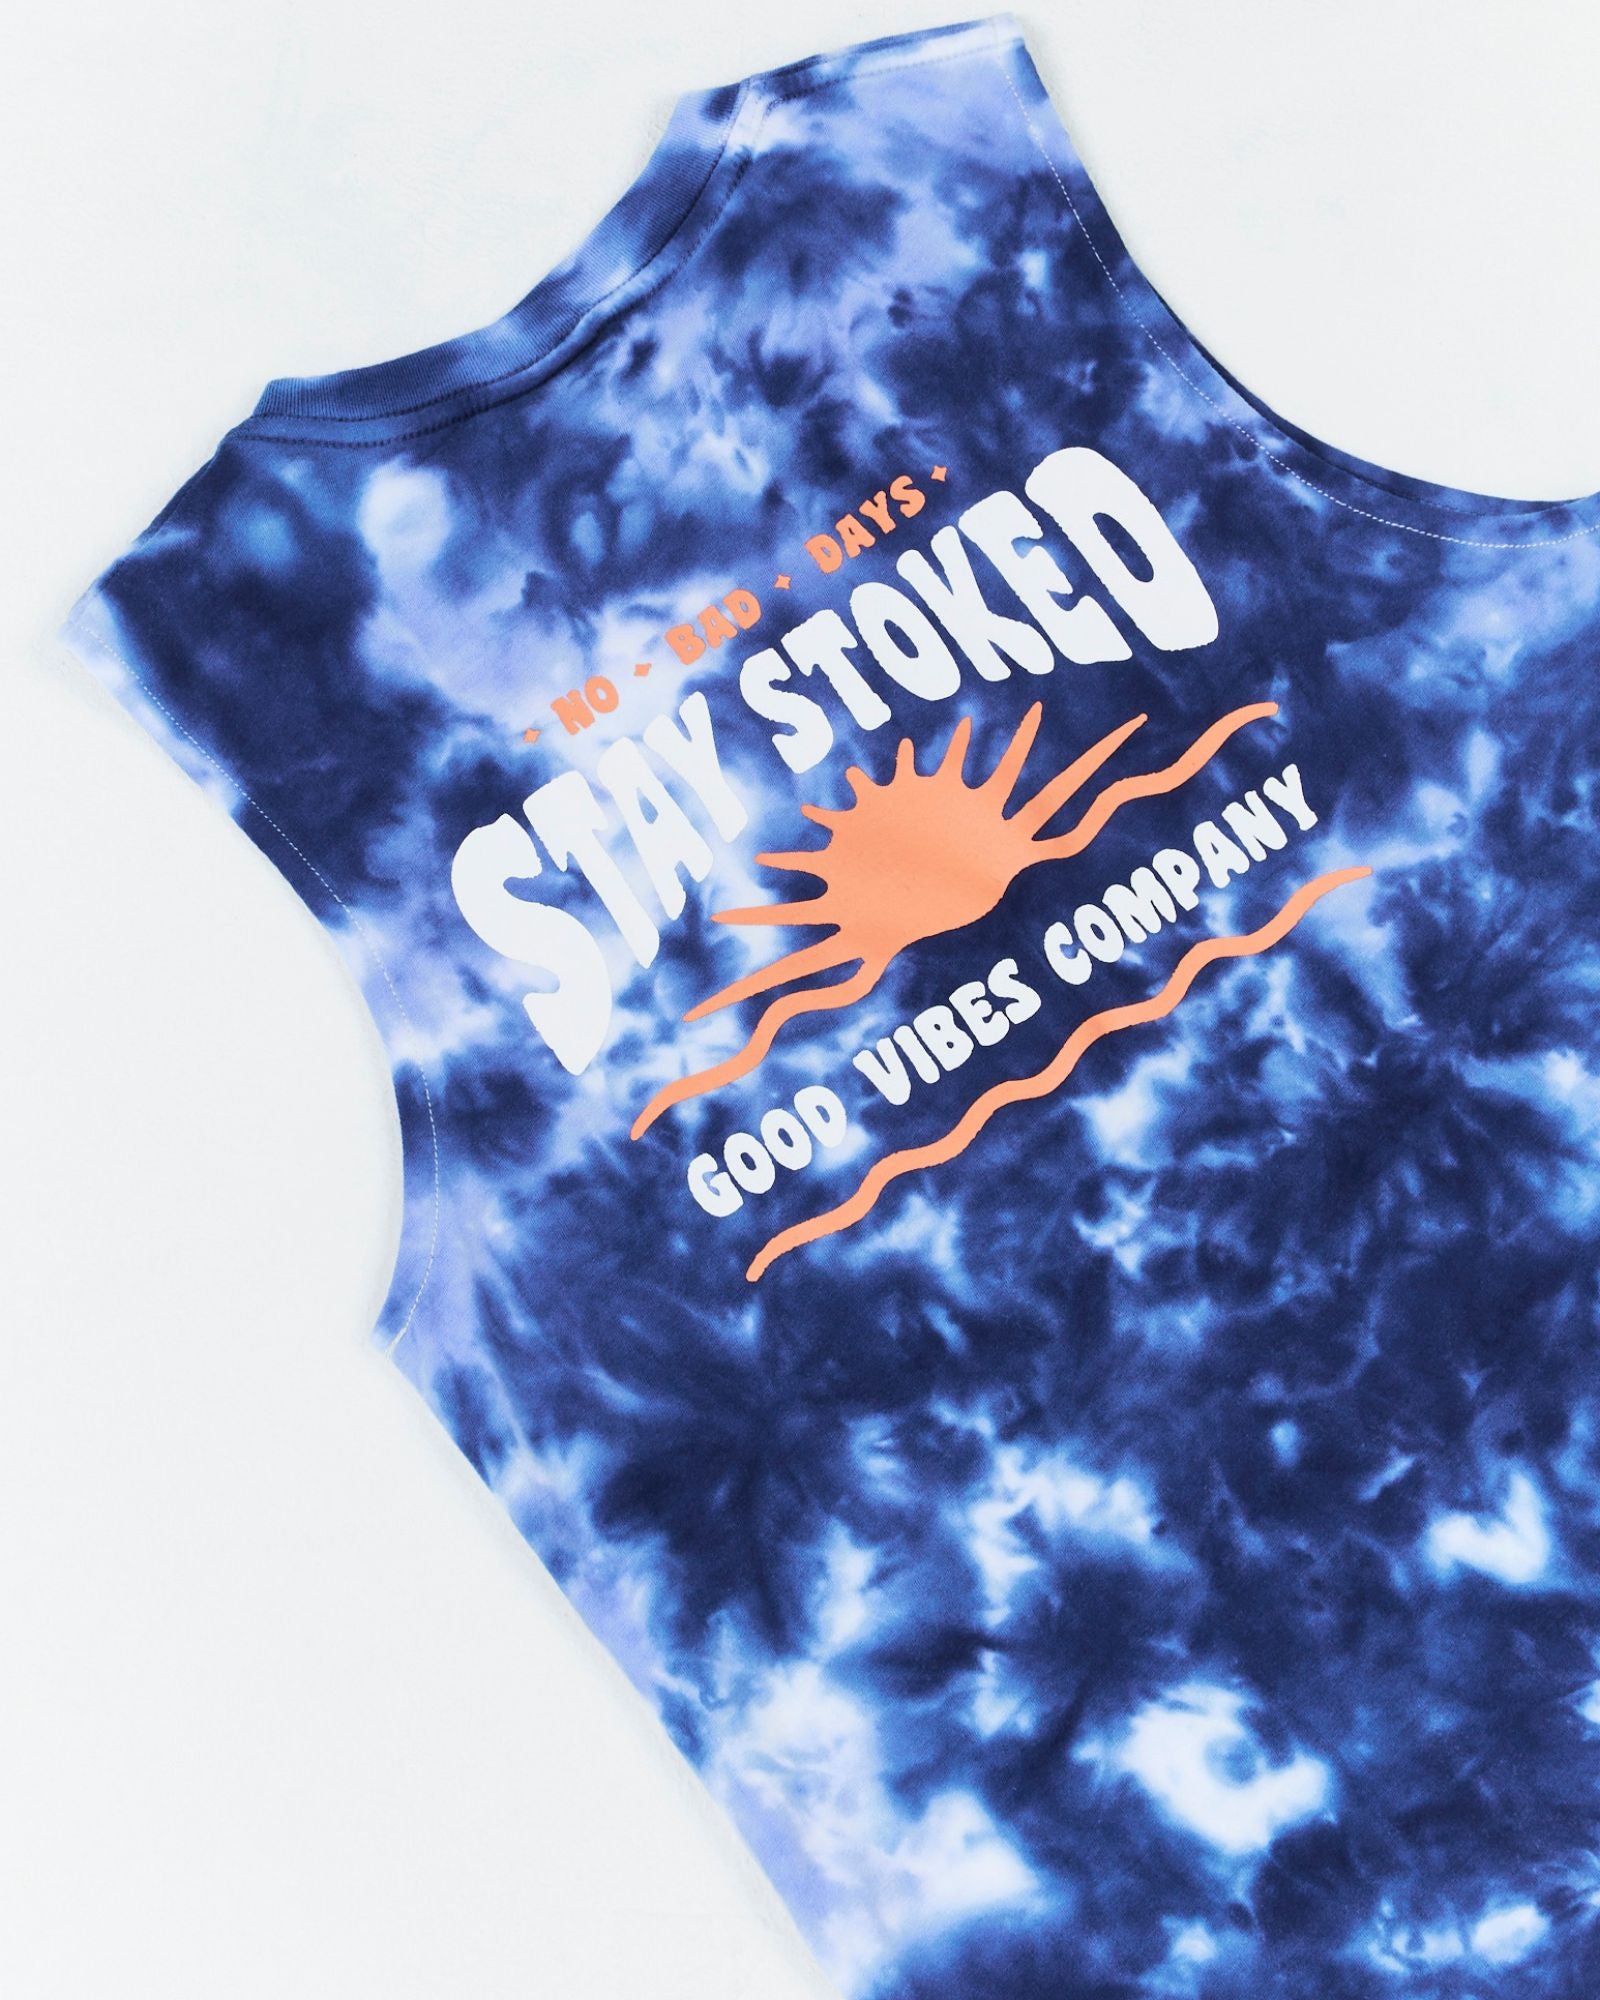 Alphabet Soup's Kids Cloud Surfer Tank for boys aged 2-7, is crafted from 100% cotton jersey. It has a straight hem, ribbed crew neckline, and marble tie dye with a woven label on the hem. Plus, it features “Stay Stoked” prints on the chest and back.